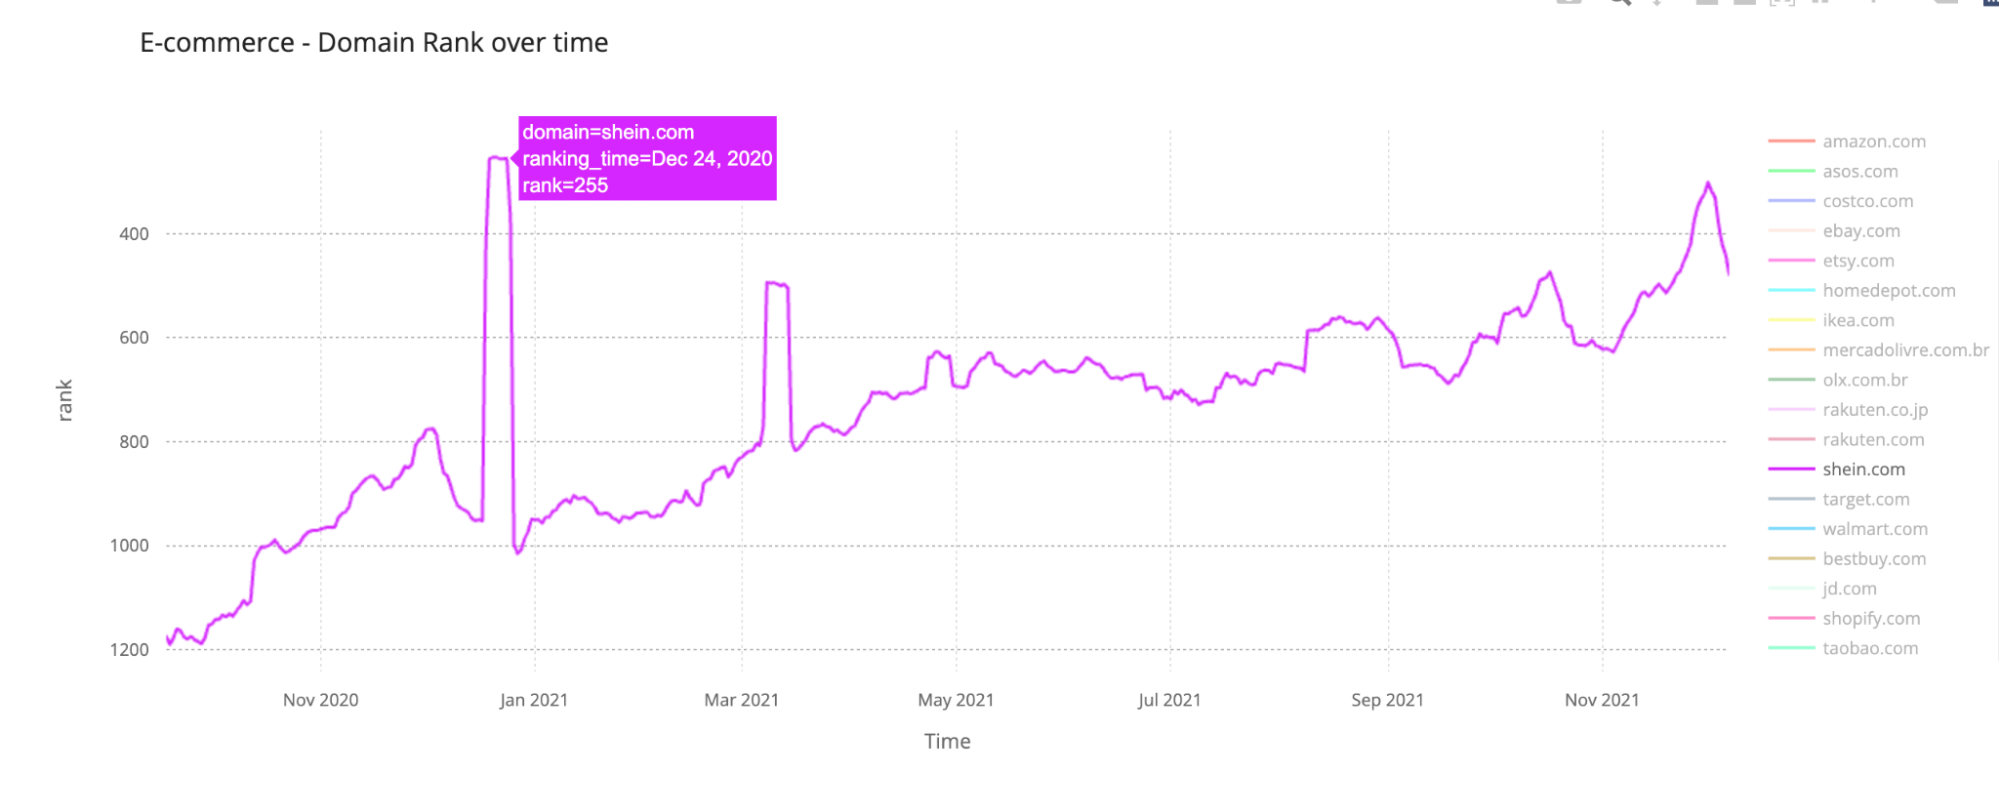 When we look to Shein.com we see that it peaked last Christmas and is on the rise since November 2021